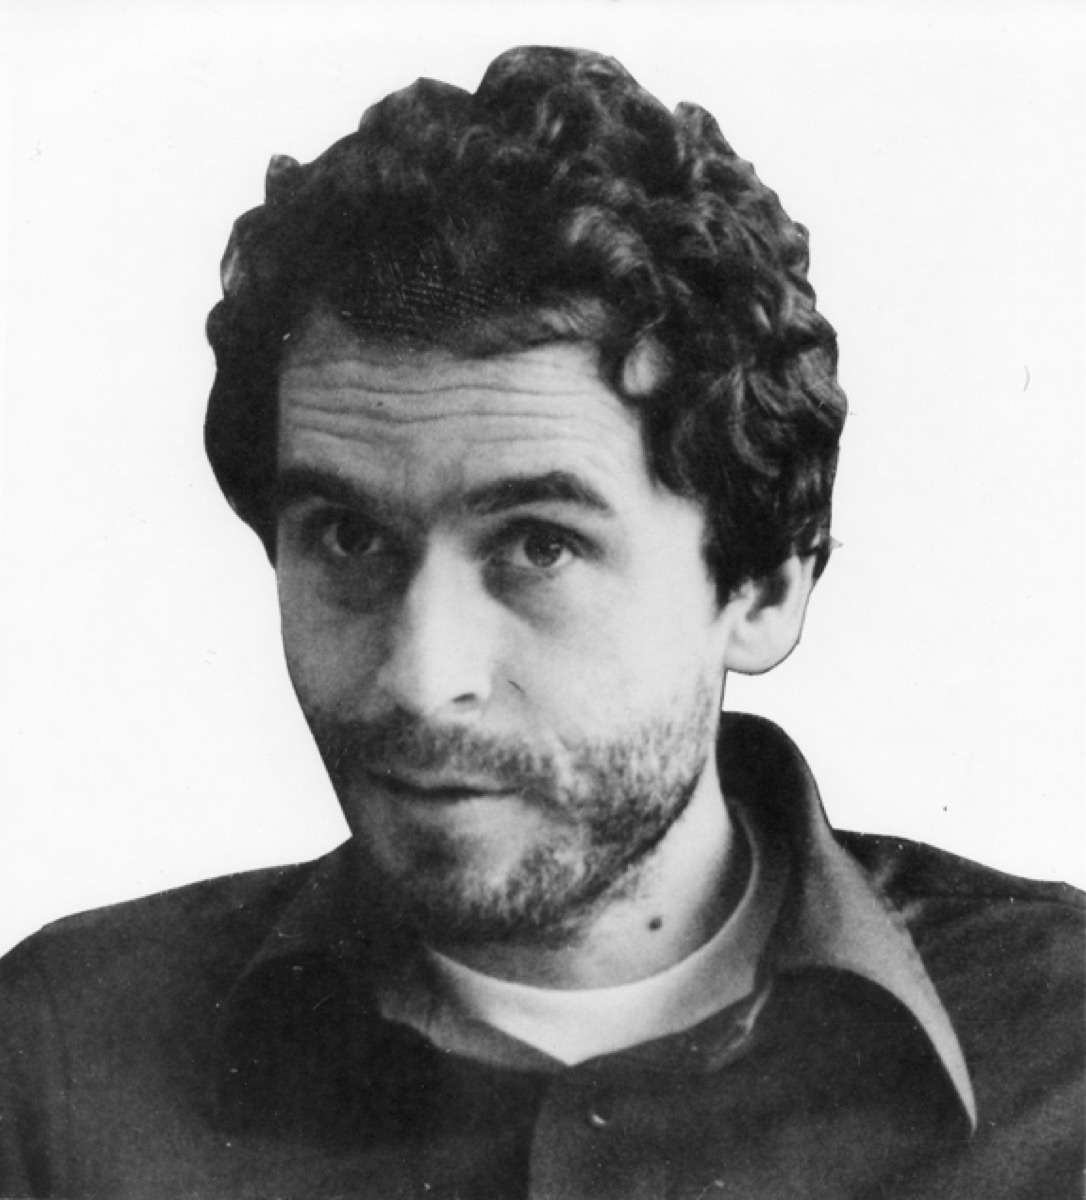 Ted Bundy TV shows to watch in 2019